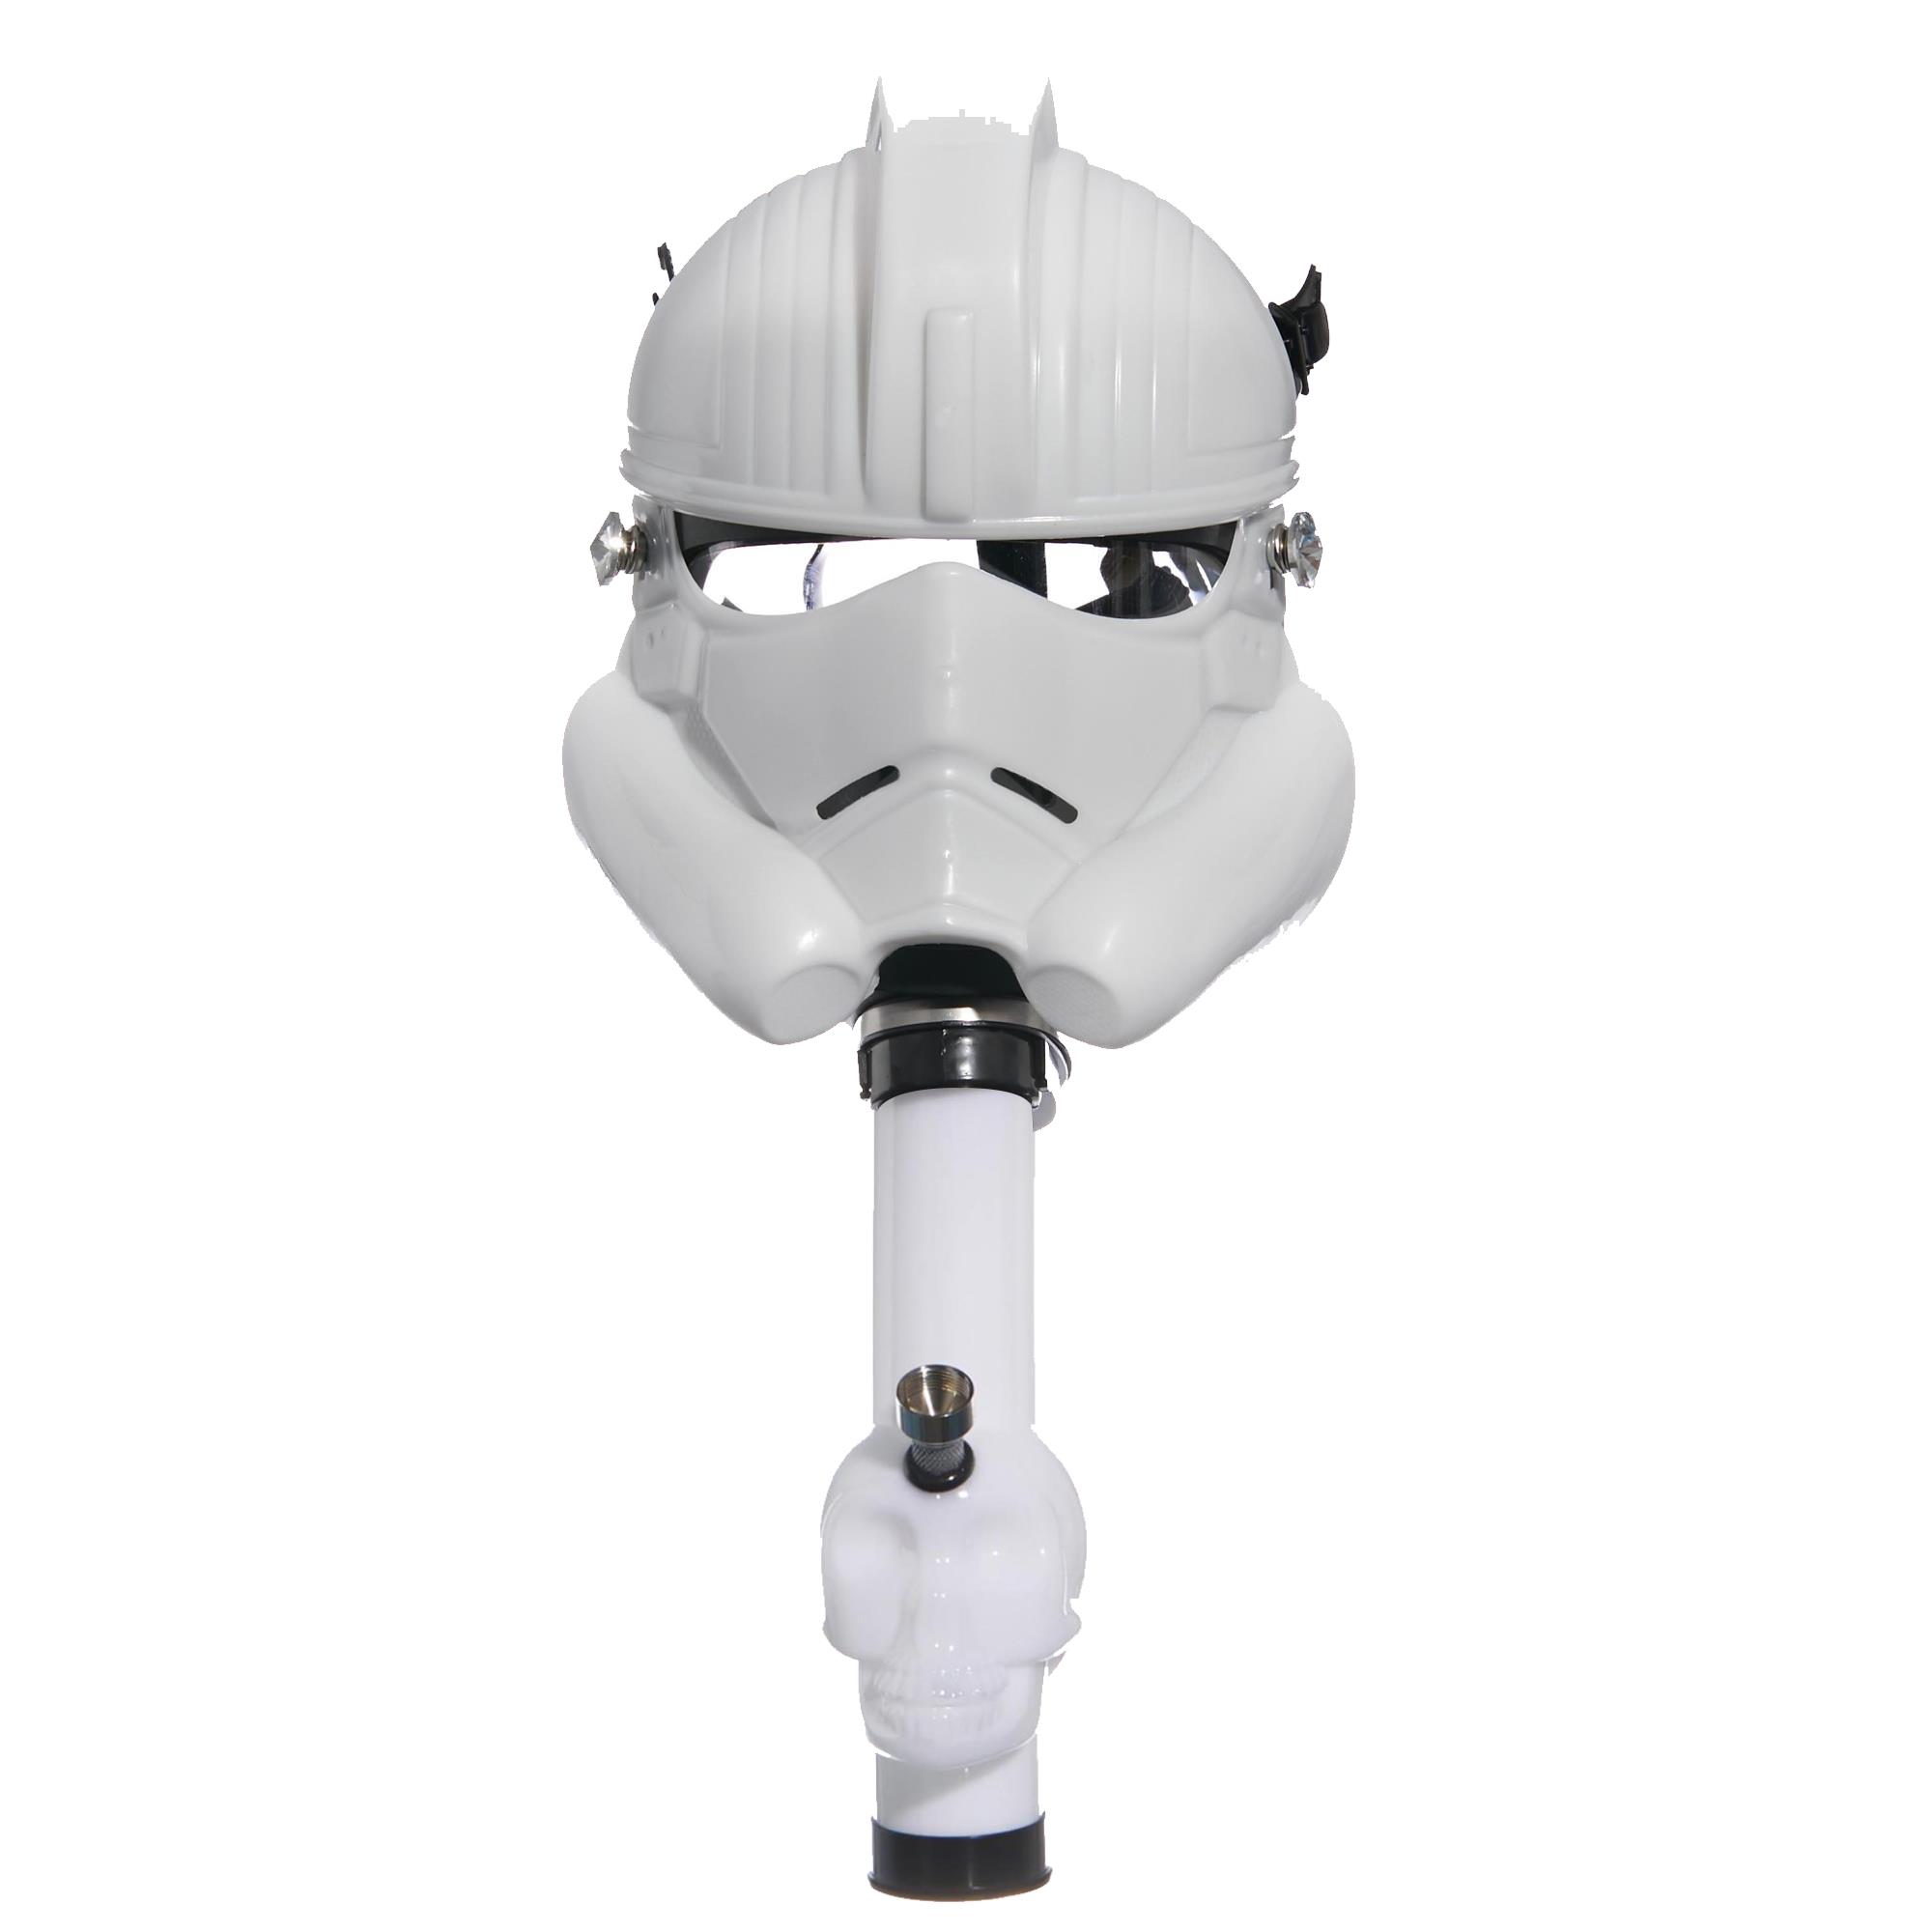 STAR WARS STORM TROOPER GAS MASK BONG Novelty Smoking Water Pipe PERFECT GIFT 